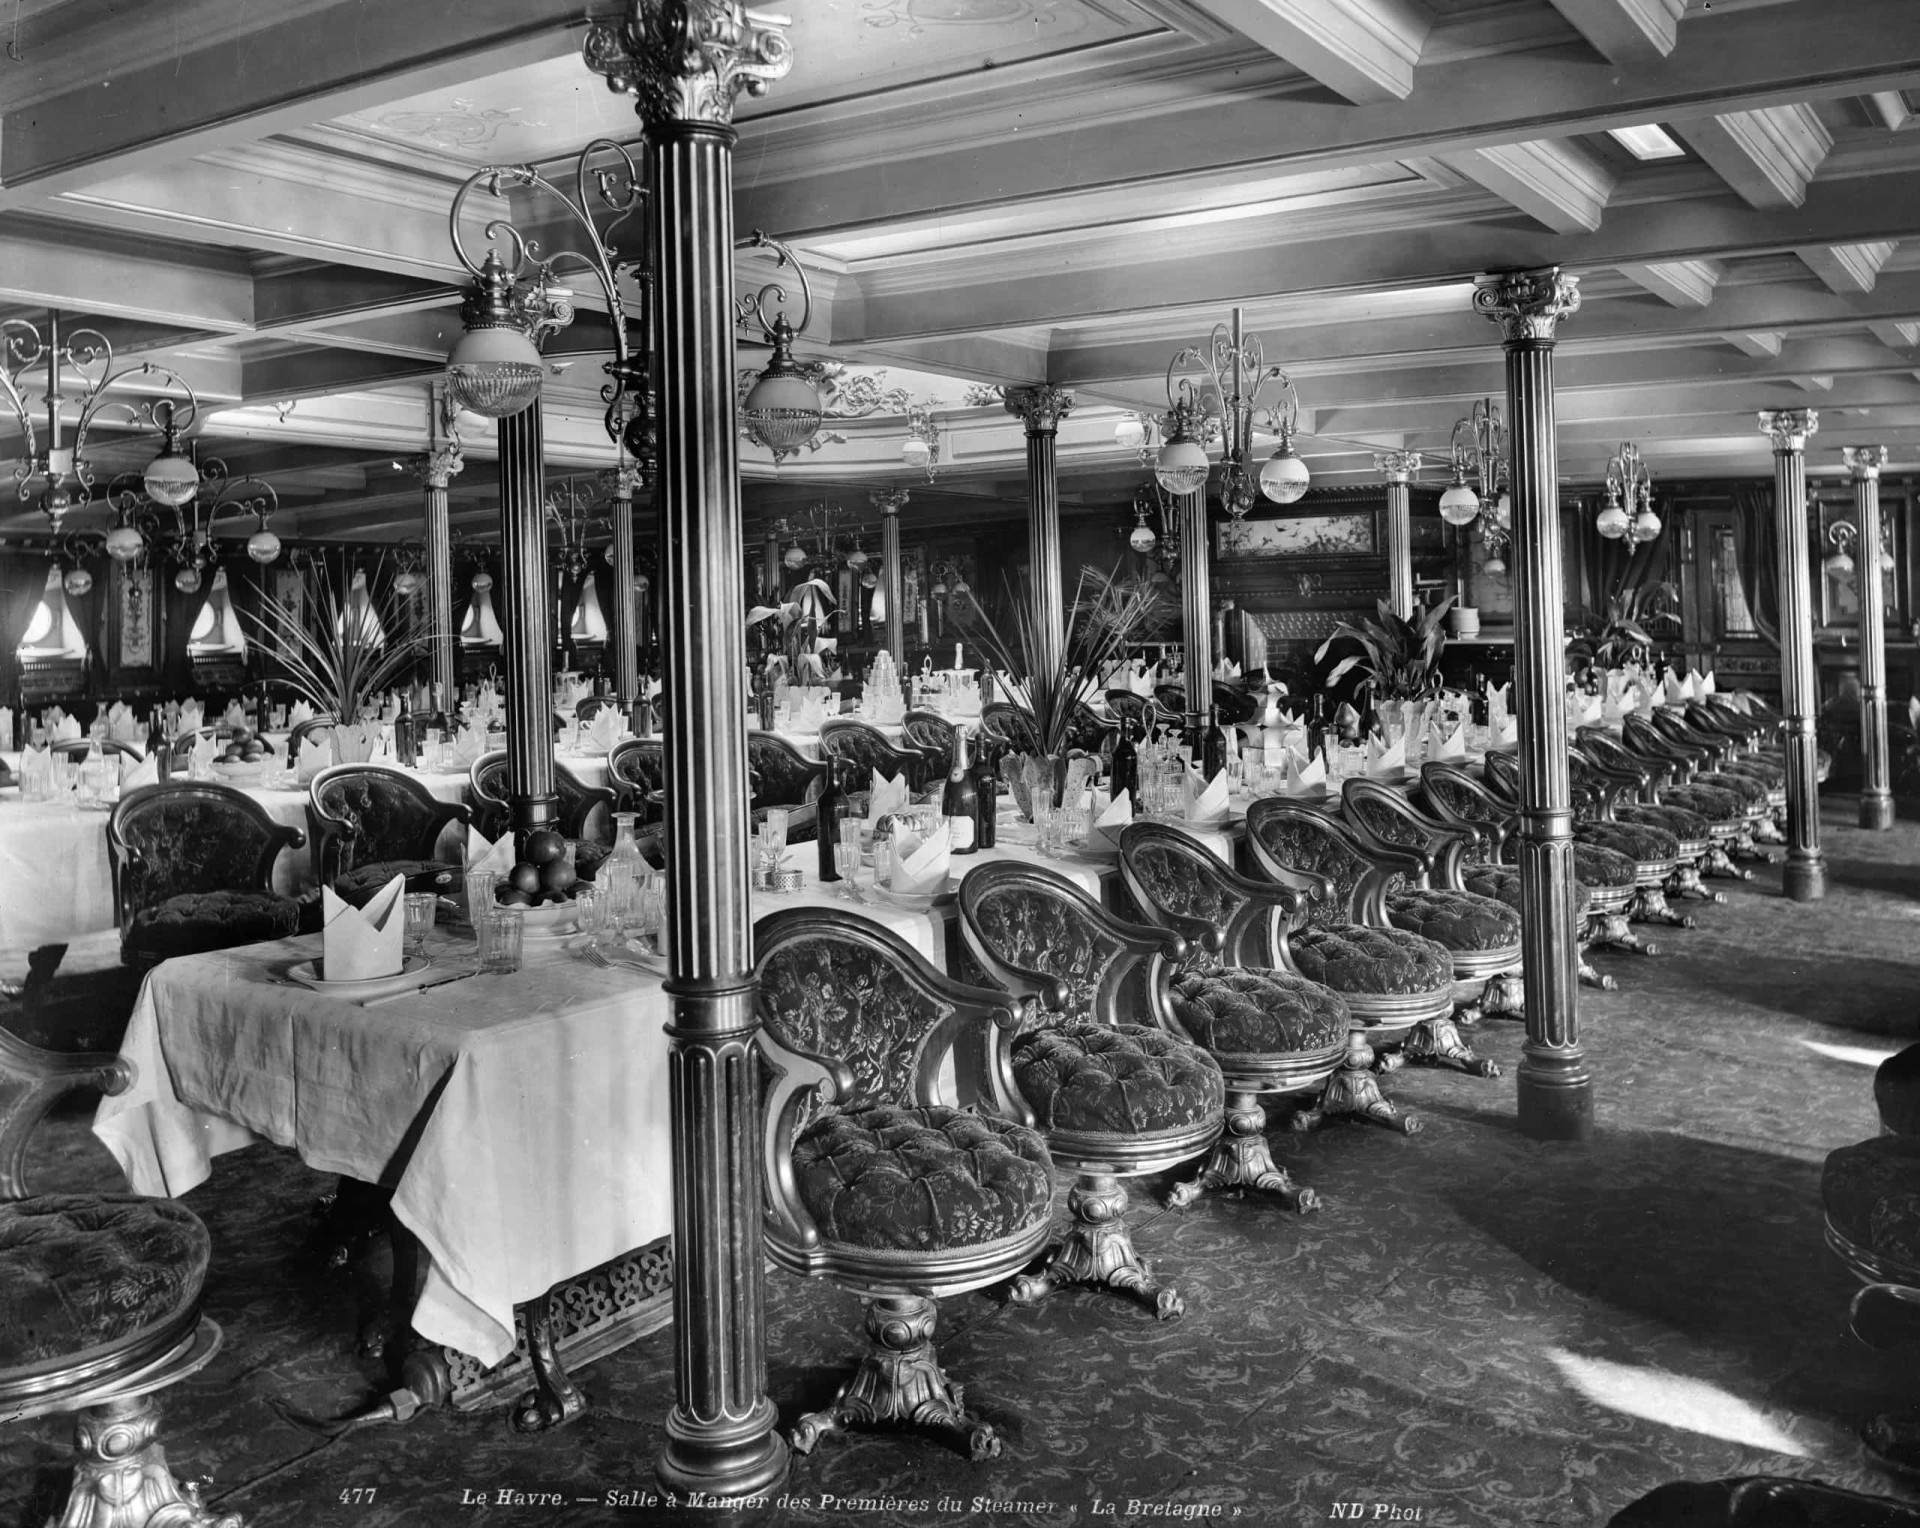 <p>As the idea of cruising caught on, shipping companies began commissioning larger and more luxurious vessels, primarily for the highly competitive transatlantic route. Pictured is the opulent dining hall of the French vessel SS <em>La Gretagne</em>, owned by Compagnie Générale Transatlantique, which was launched on September 9, 1885.</p><p>You may also like:<a href="https://www.starsinsider.com/n/354877?utm_source=msn.com&utm_medium=display&utm_campaign=referral_description&utm_content=502910v1en-ae"> William and Kate's love through the years</a></p>